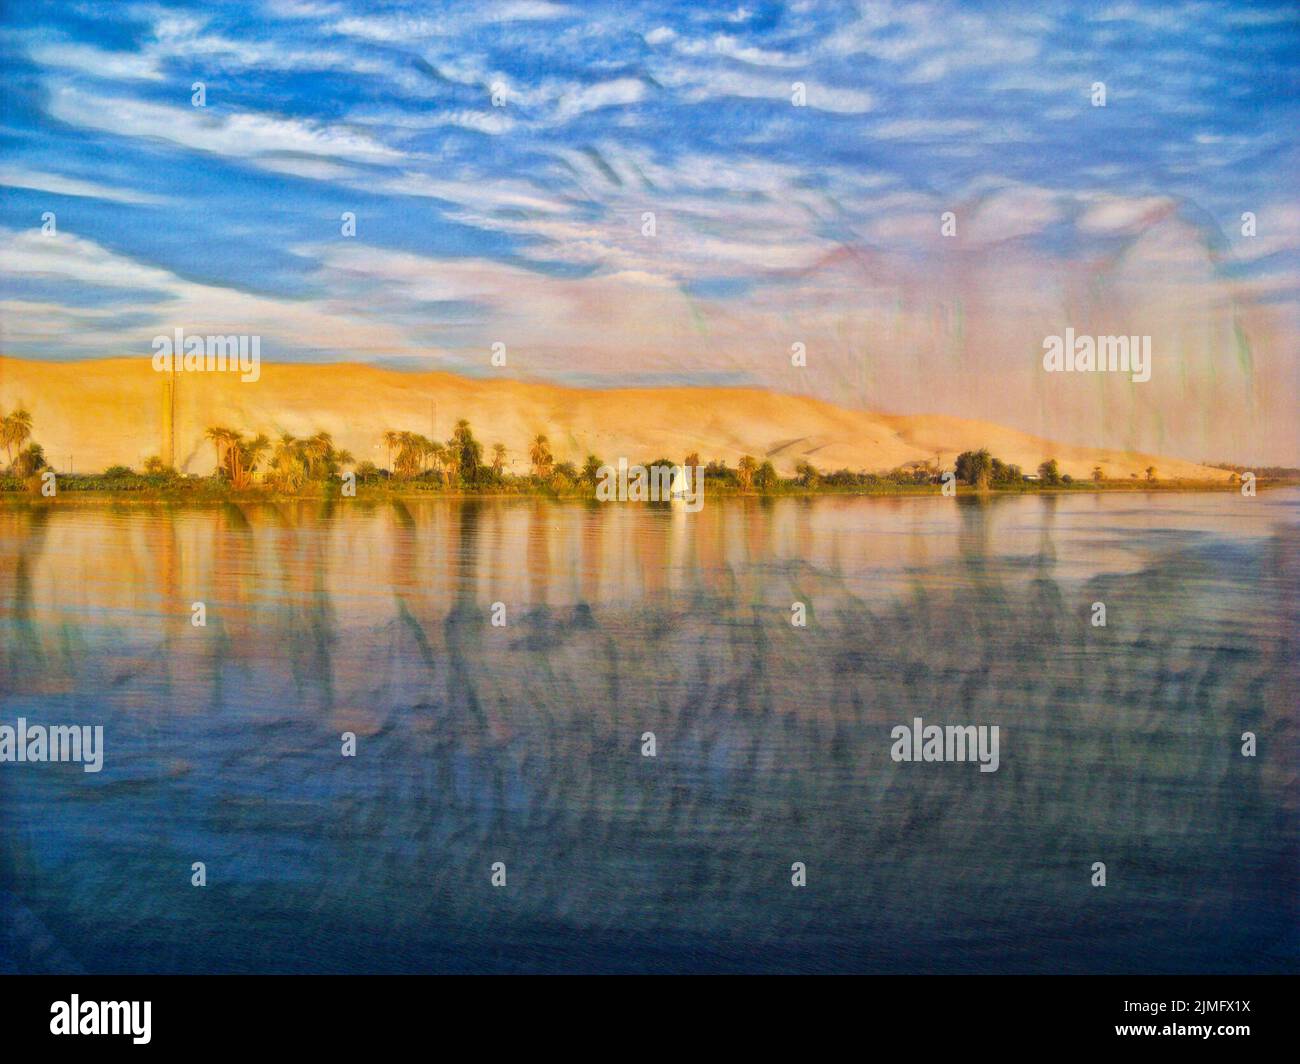 Along the Nile River in Egypt, with blue water, blue sky, and the bright white sail of a small boat. With a thin strip of greenery and dunes behind th Stock Photo